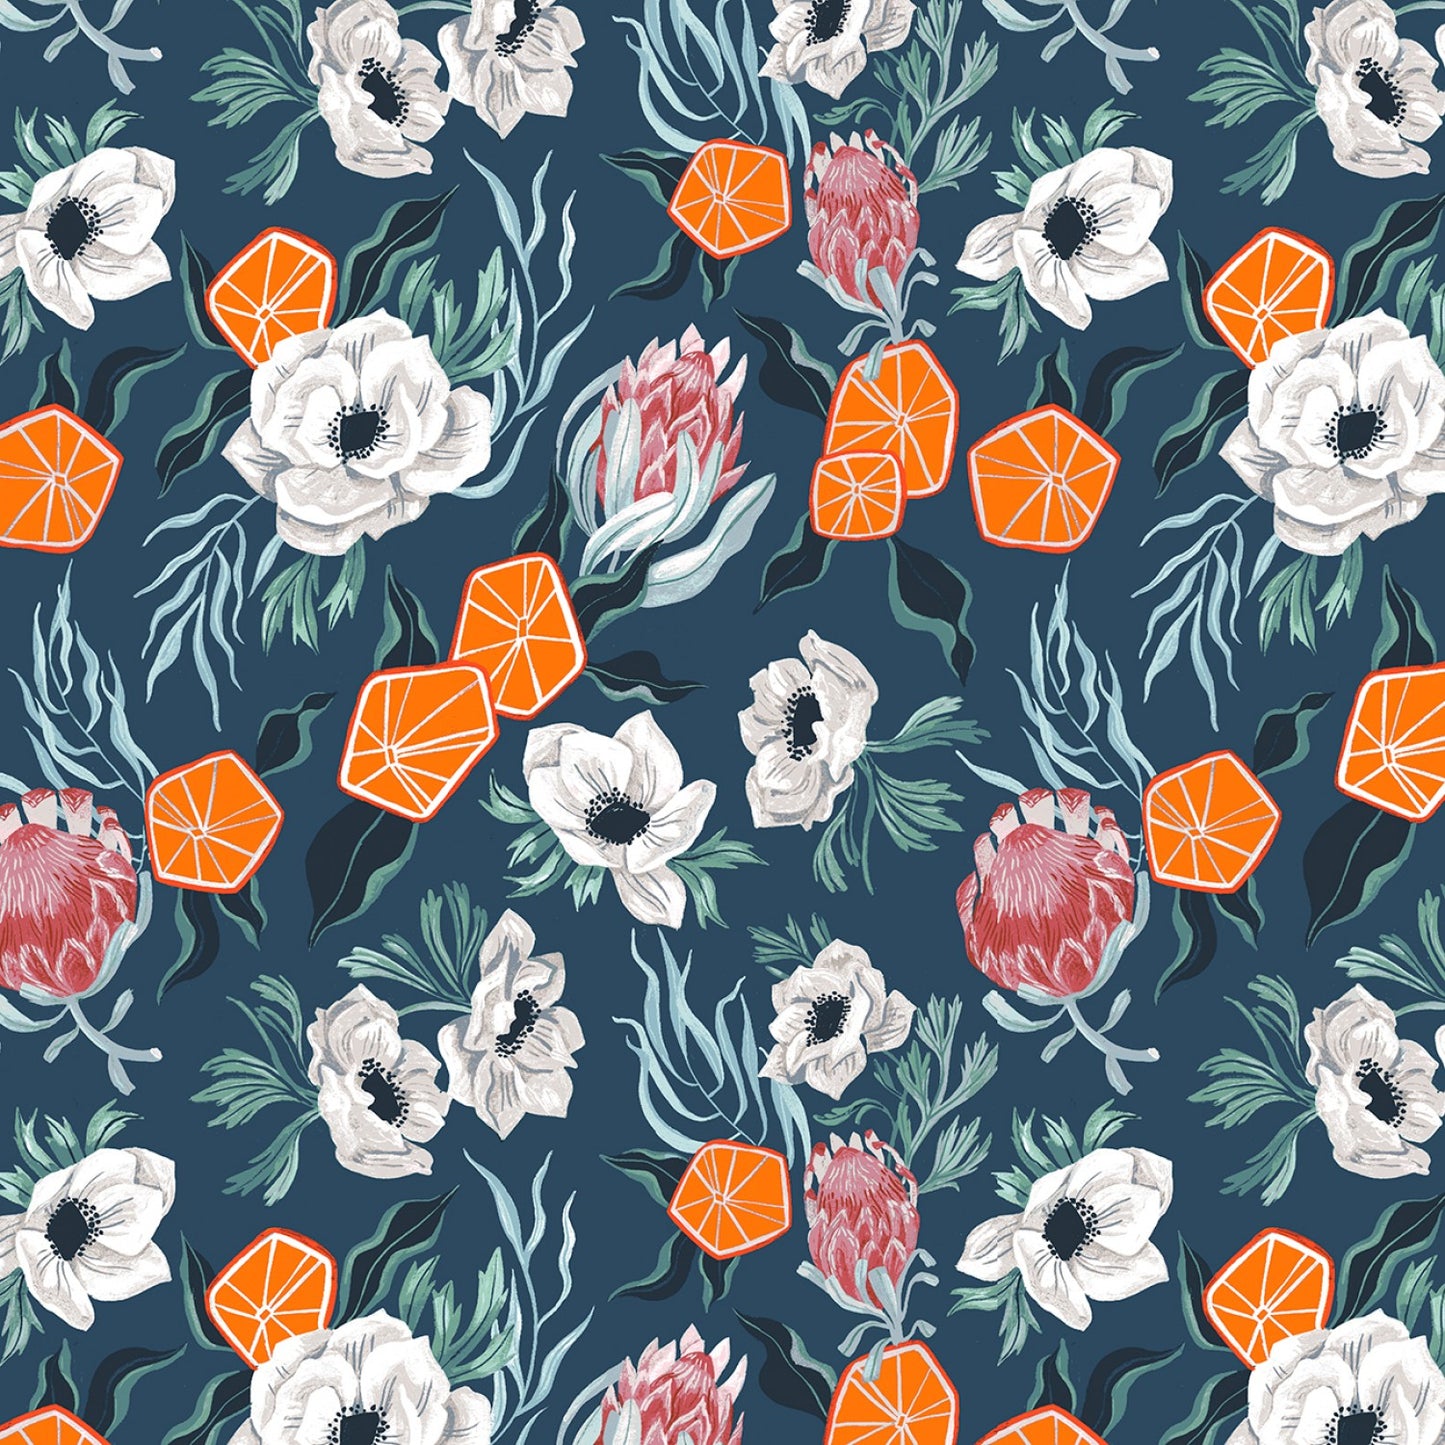 Rae Ritchie - Frosty Forage - Frosty Floral With Oranges - Quartz